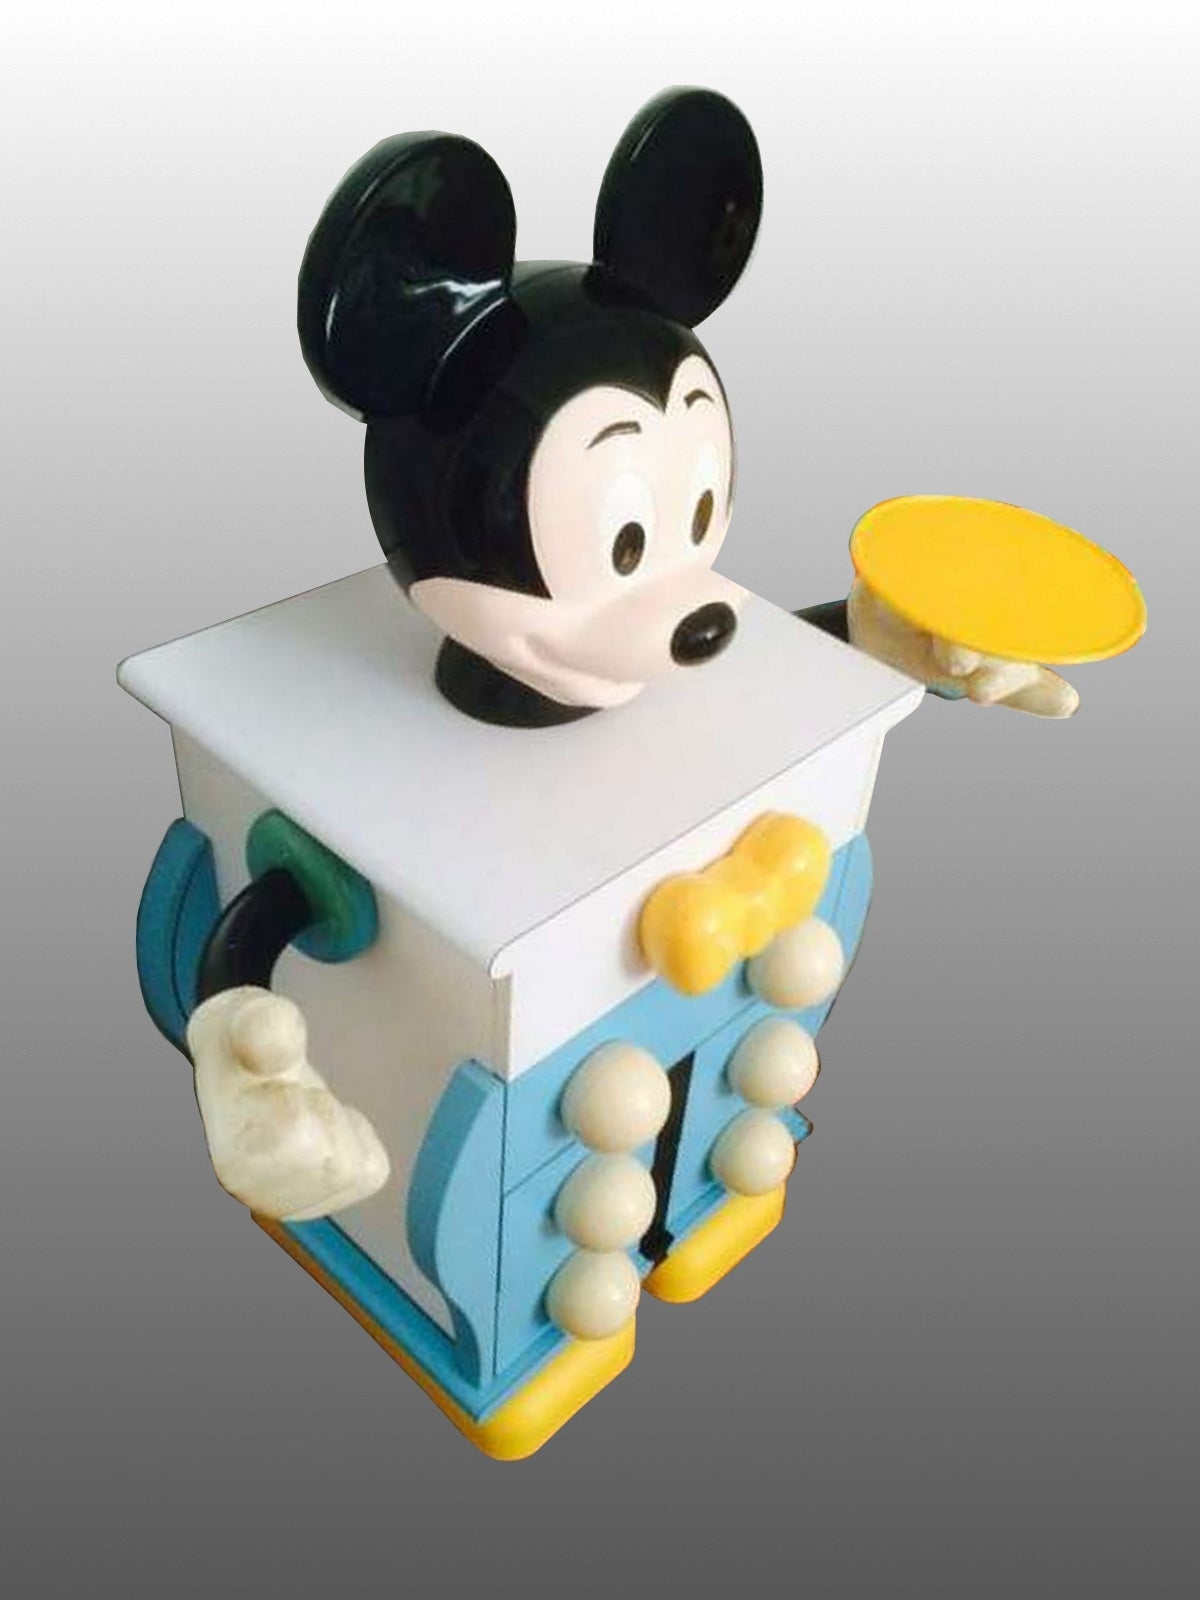 1980s Mickey Mouse commode in plywood and plastic with four drawers, designed by PIerre Colleu (born in 1948) and edited by Starform. 

Moulded plastic. Colored plastic laminate on wood.